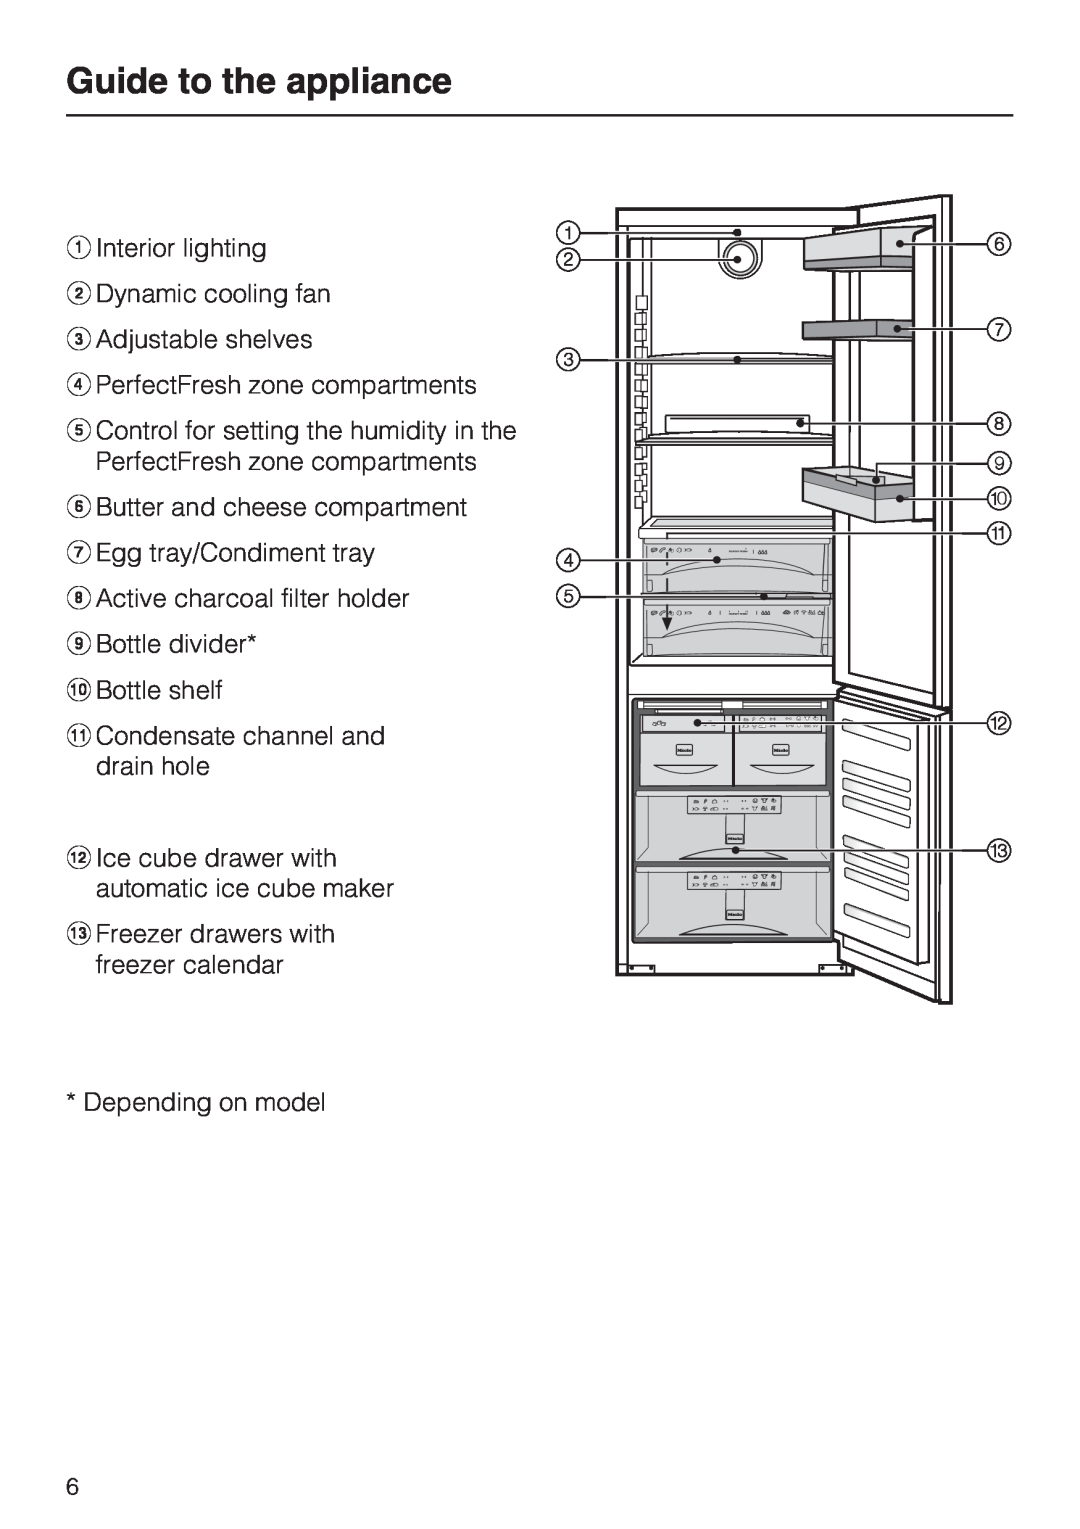 Miele KFN 14947 SDE ED installation instructions Guide to the appliance, aInterior lighting bDynamic cooling fan 